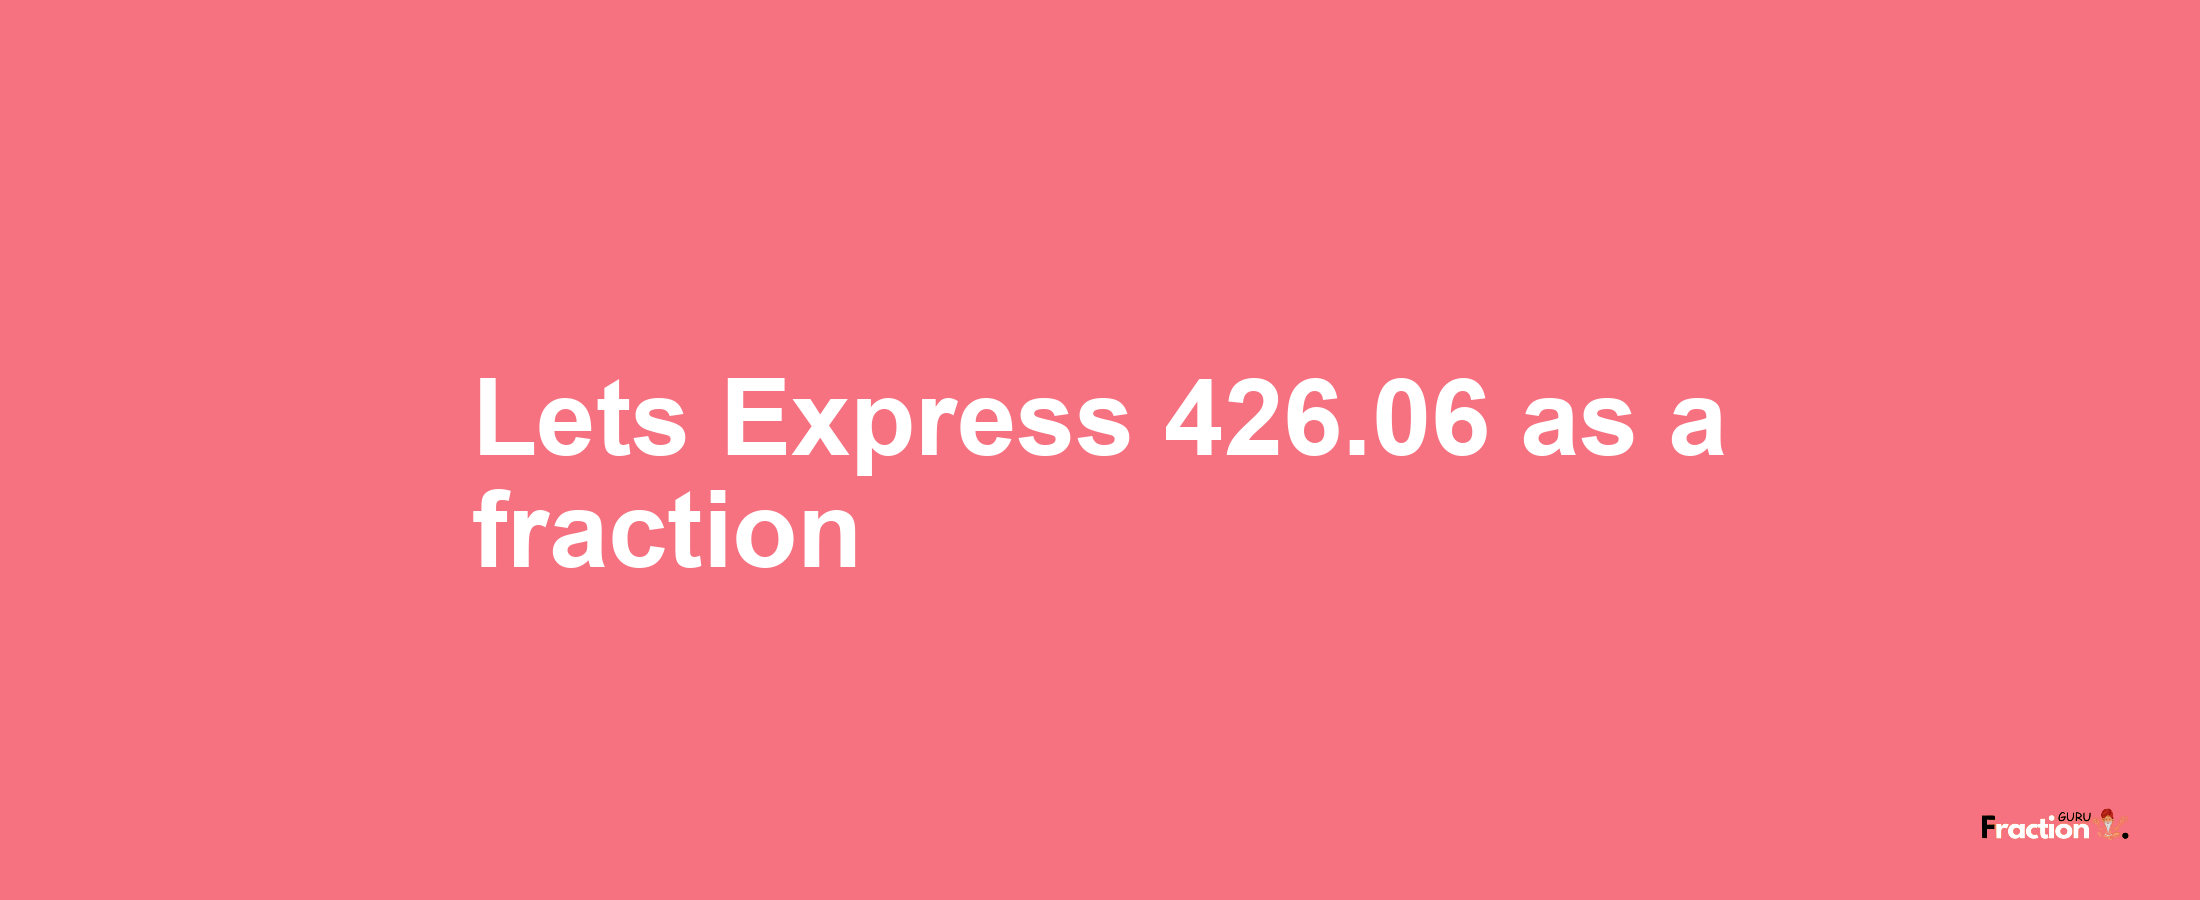 Lets Express 426.06 as afraction